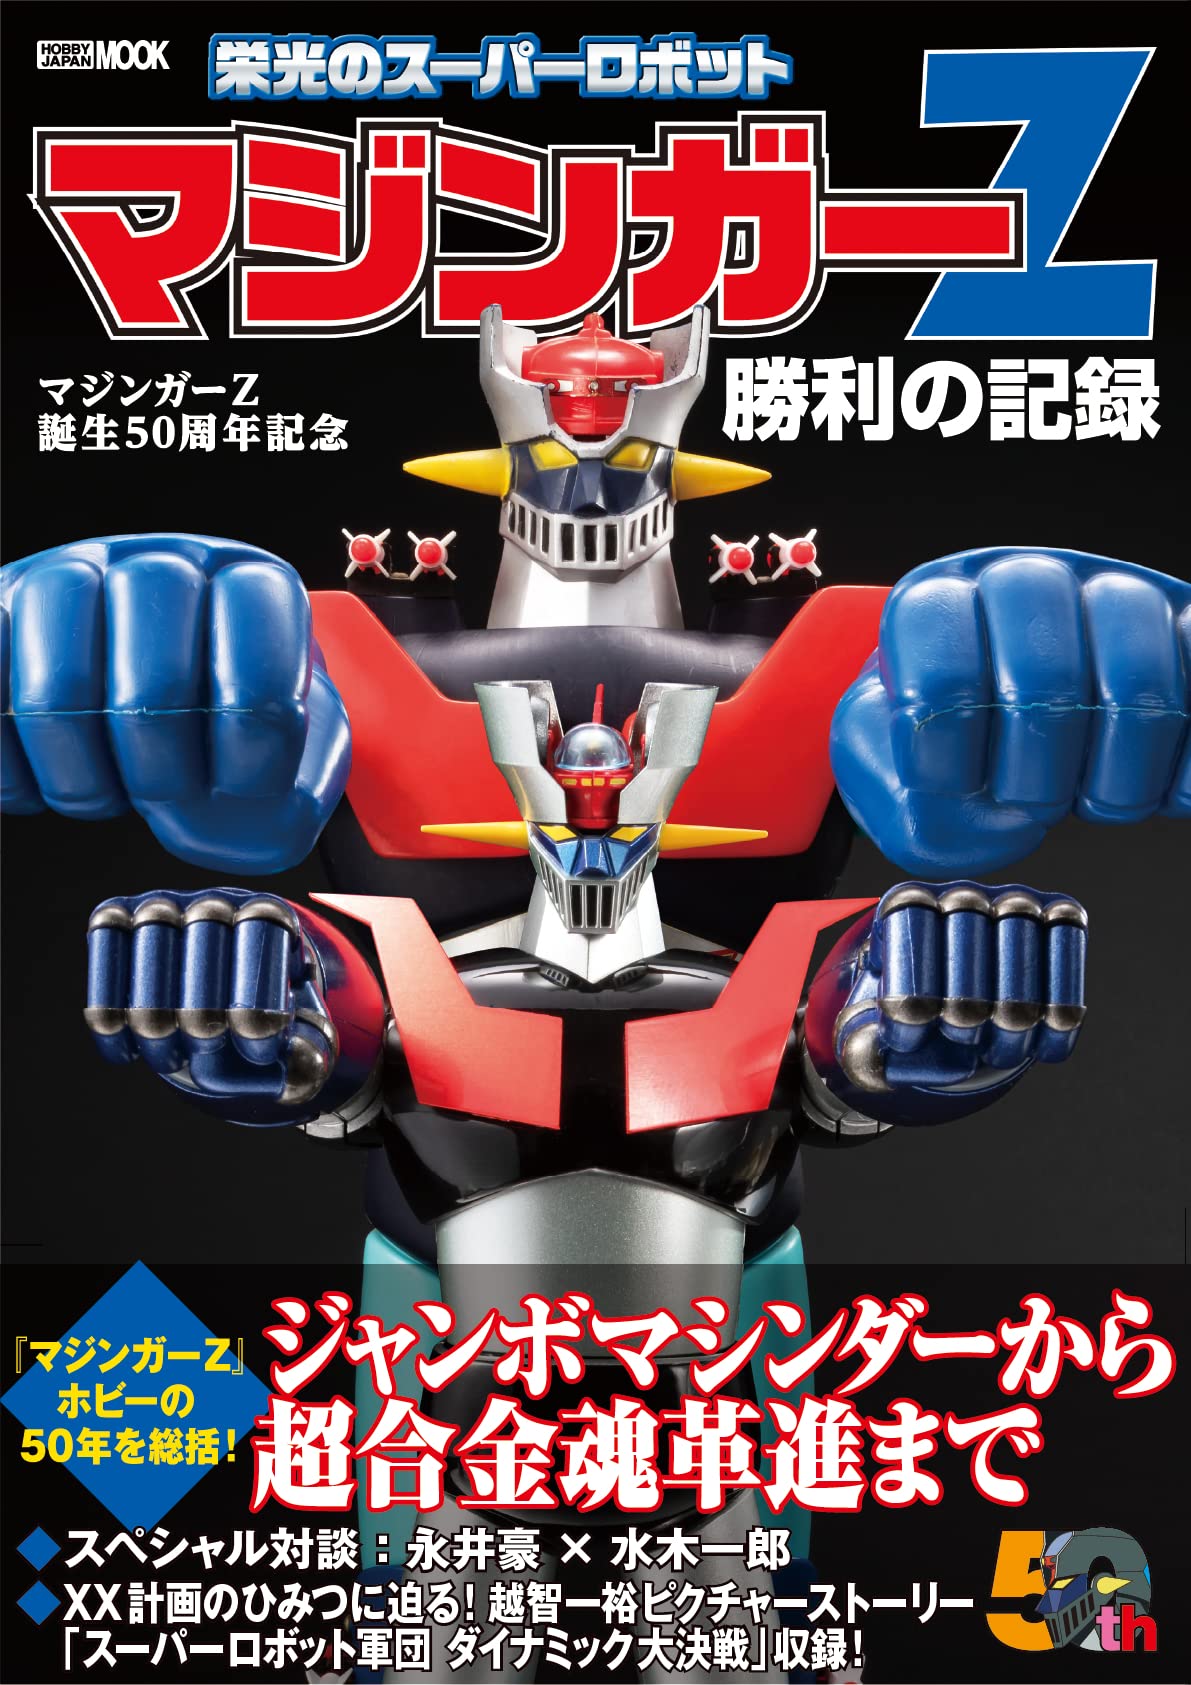 Catsuka Shopping - Mazinger Z Record of Victory - 50th Anniversary 